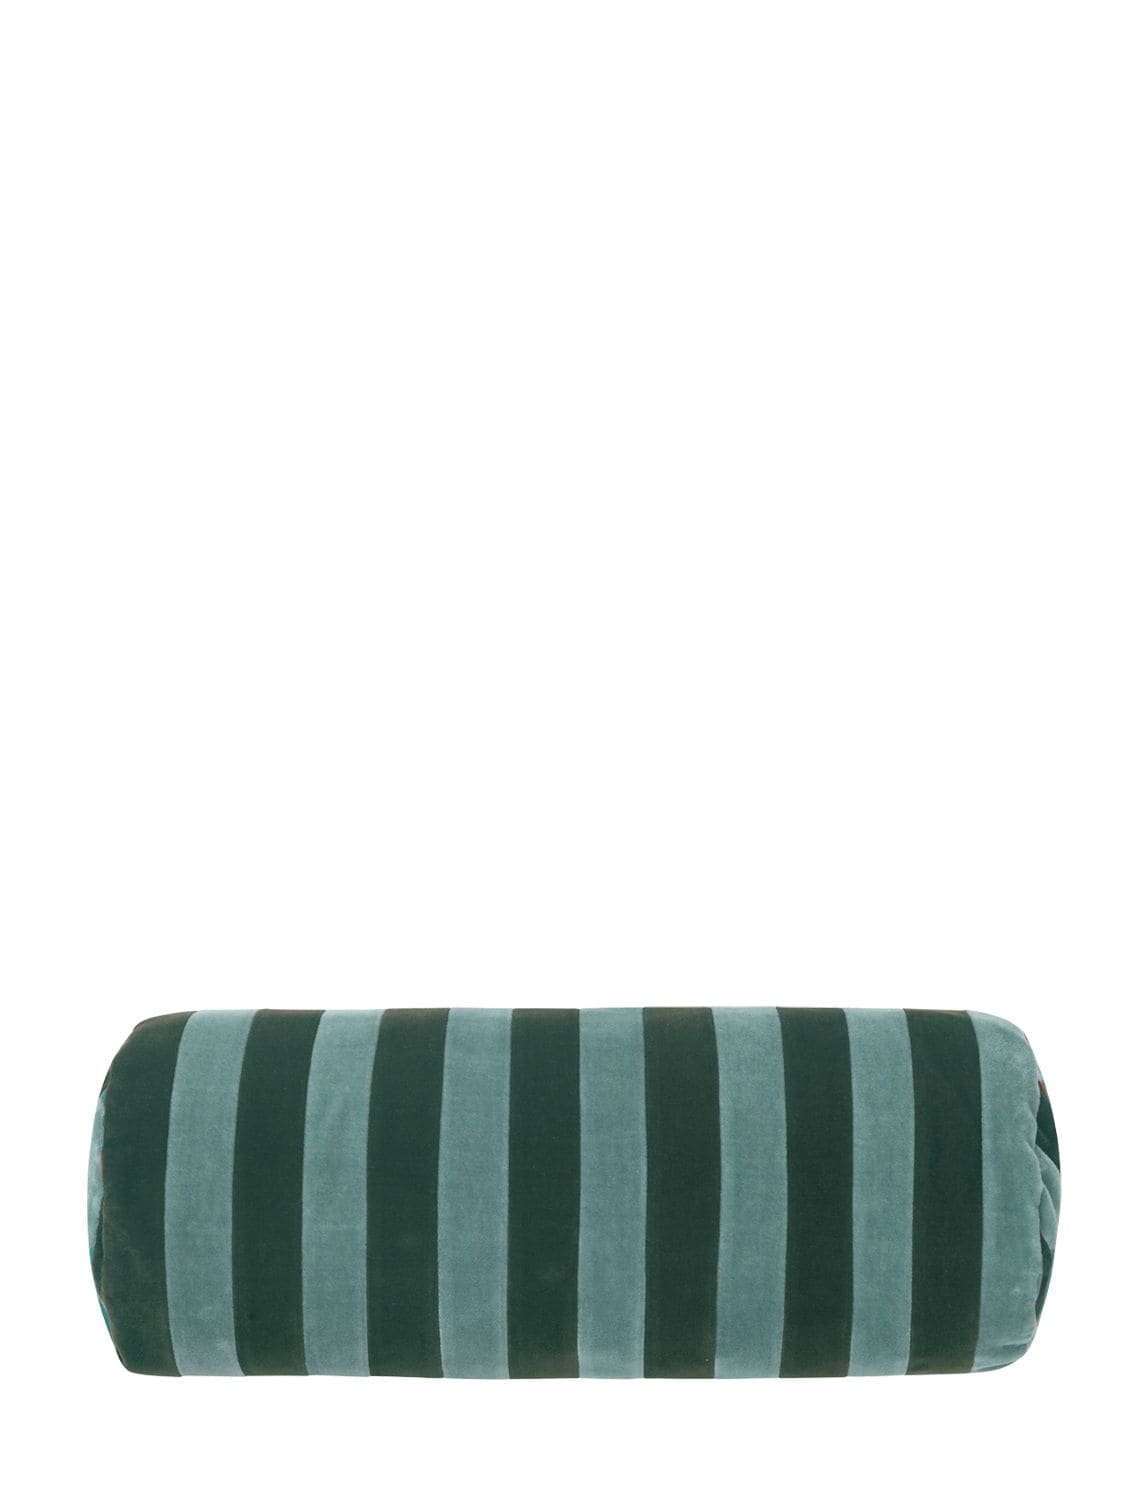 Christina Lundsteen Striped Bolster In Blue